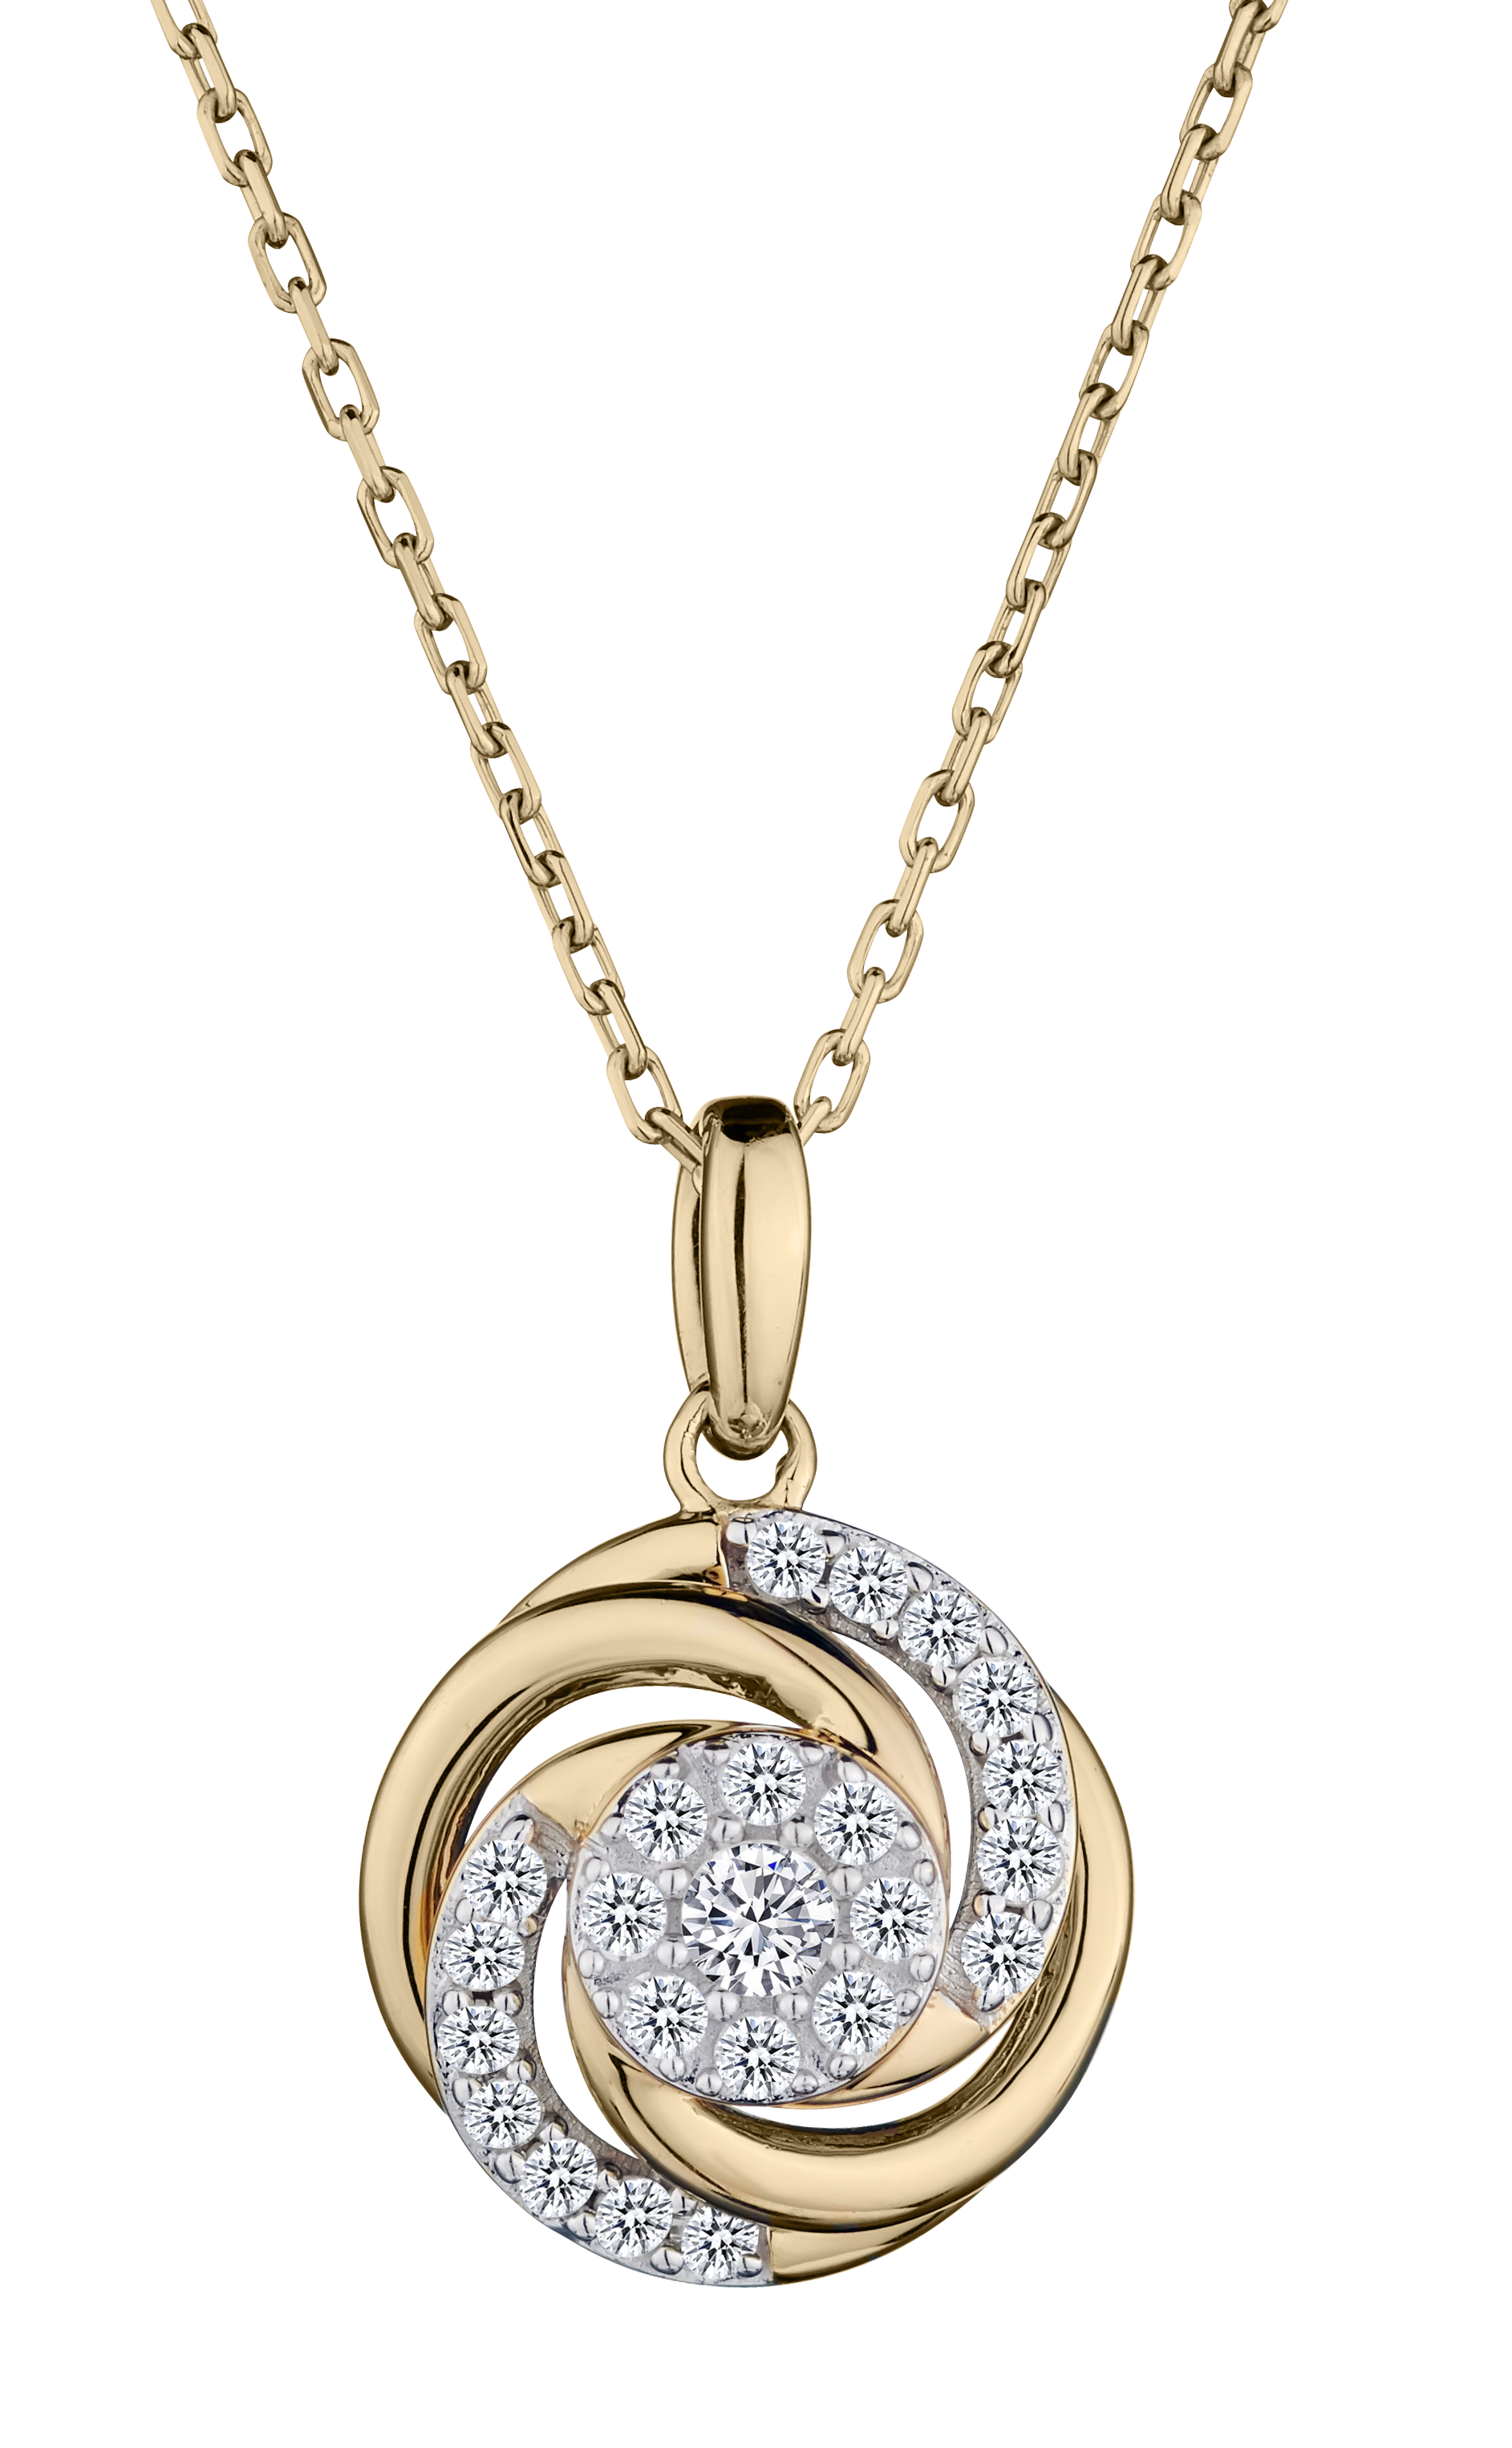 .25 Carat Diamond "Bloom" Pendant, Silver (Gold Plated).....................NOW